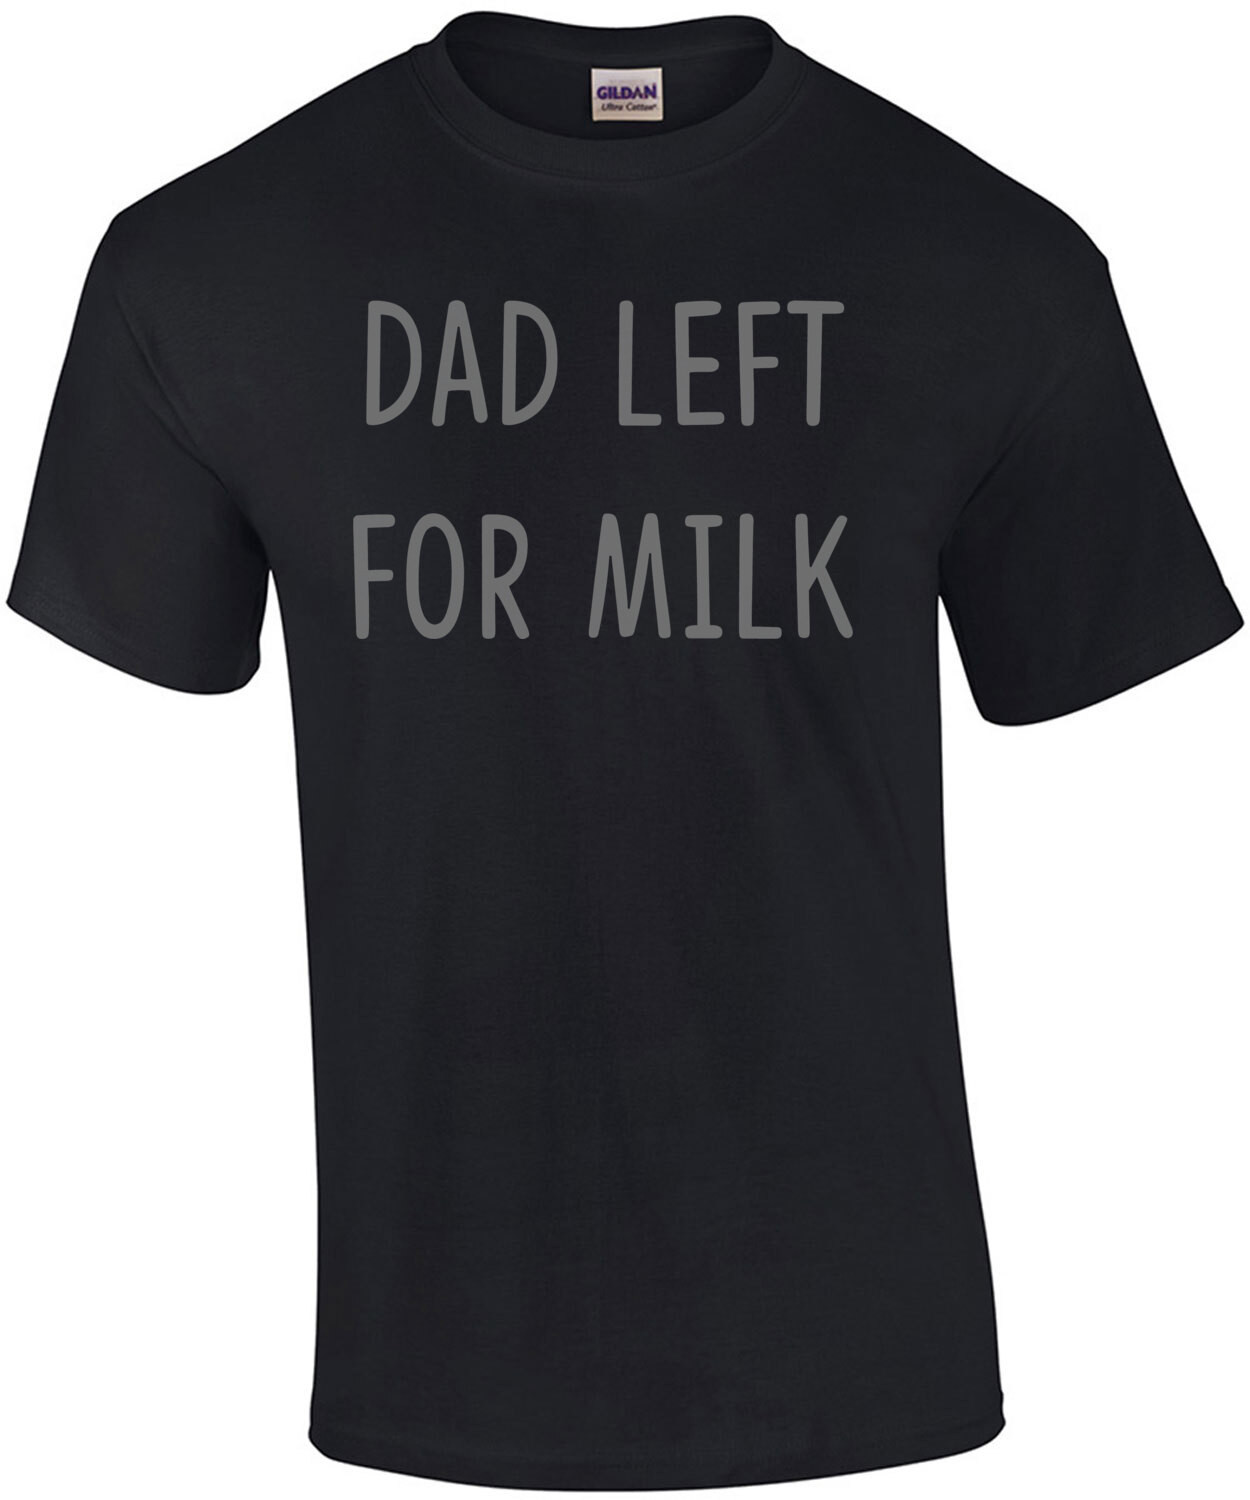 Dad Left For Milk Funny T-Shirt